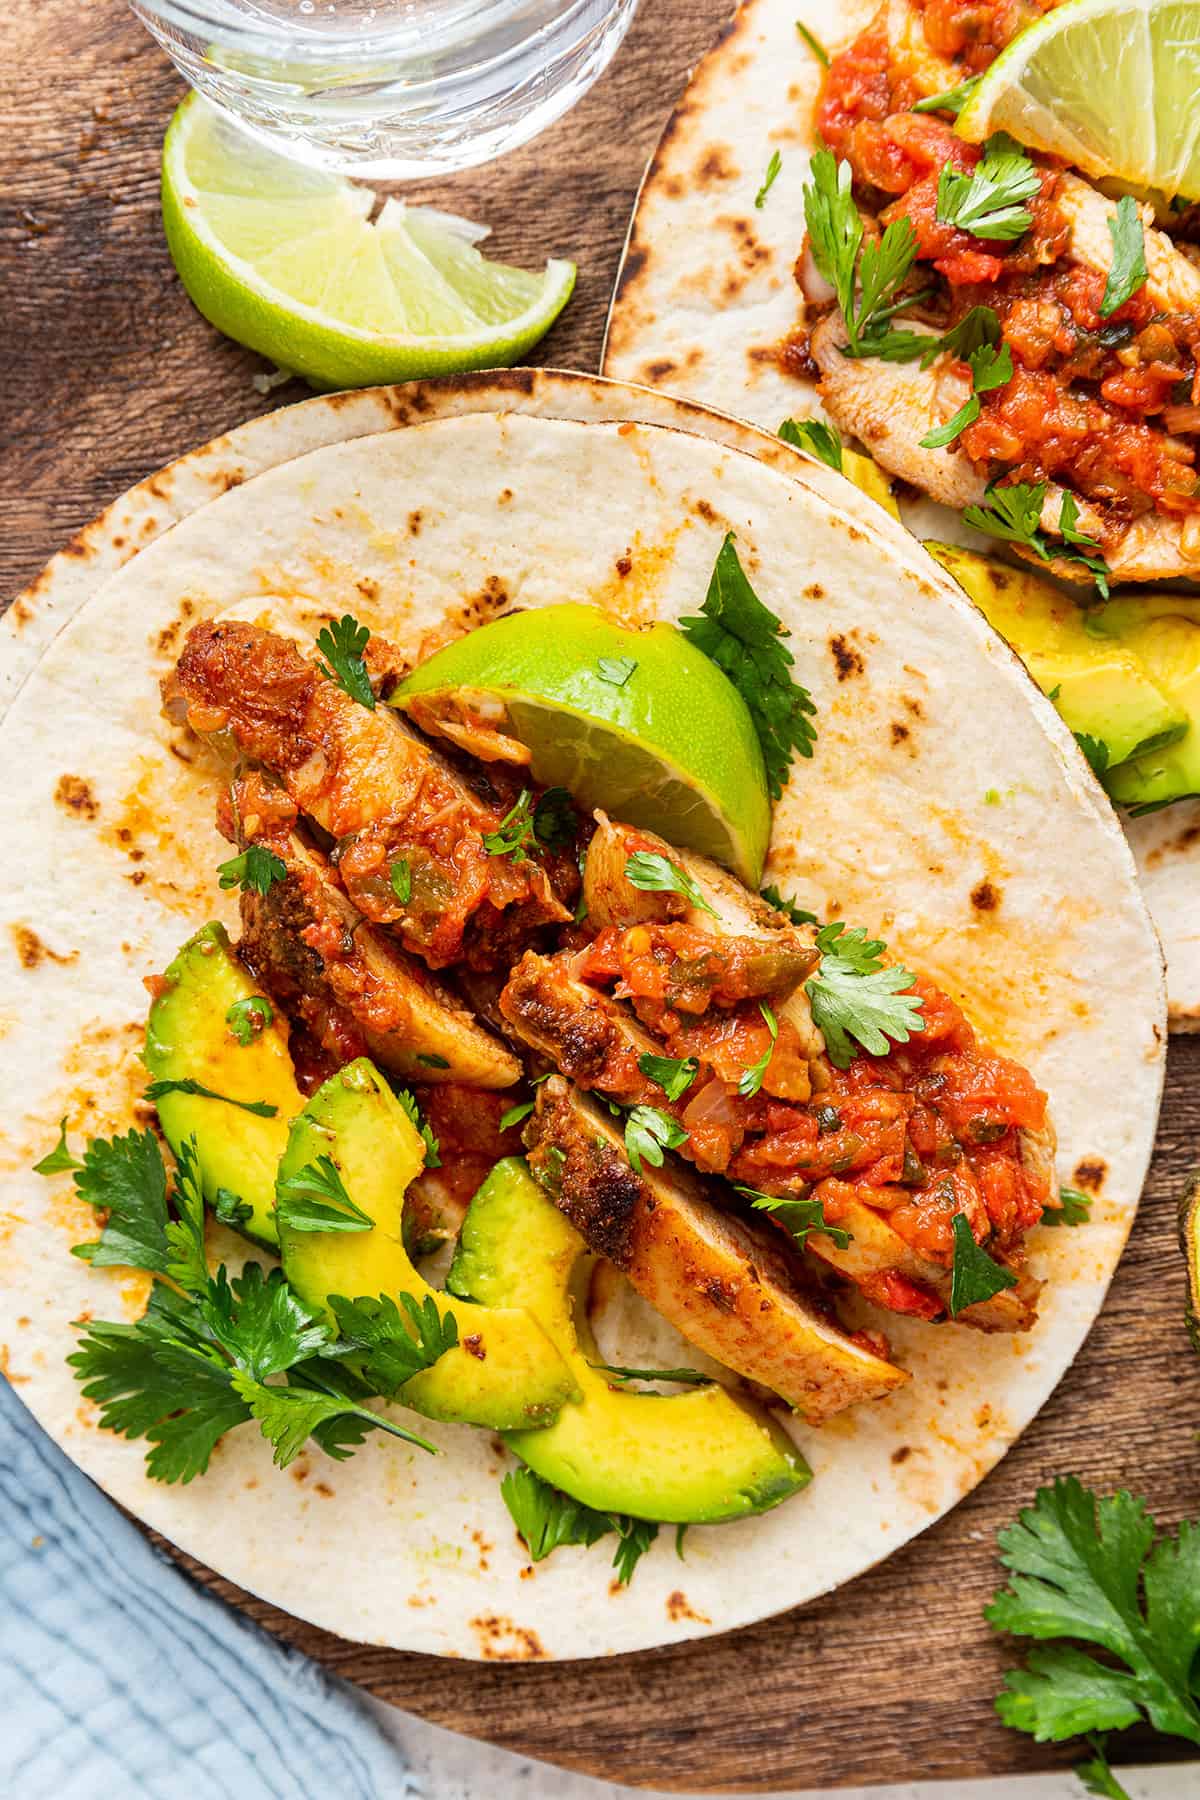 Overhead view of blackened chicken tacos on wood board, topped with avocado slices, cilantro, and lime wedge